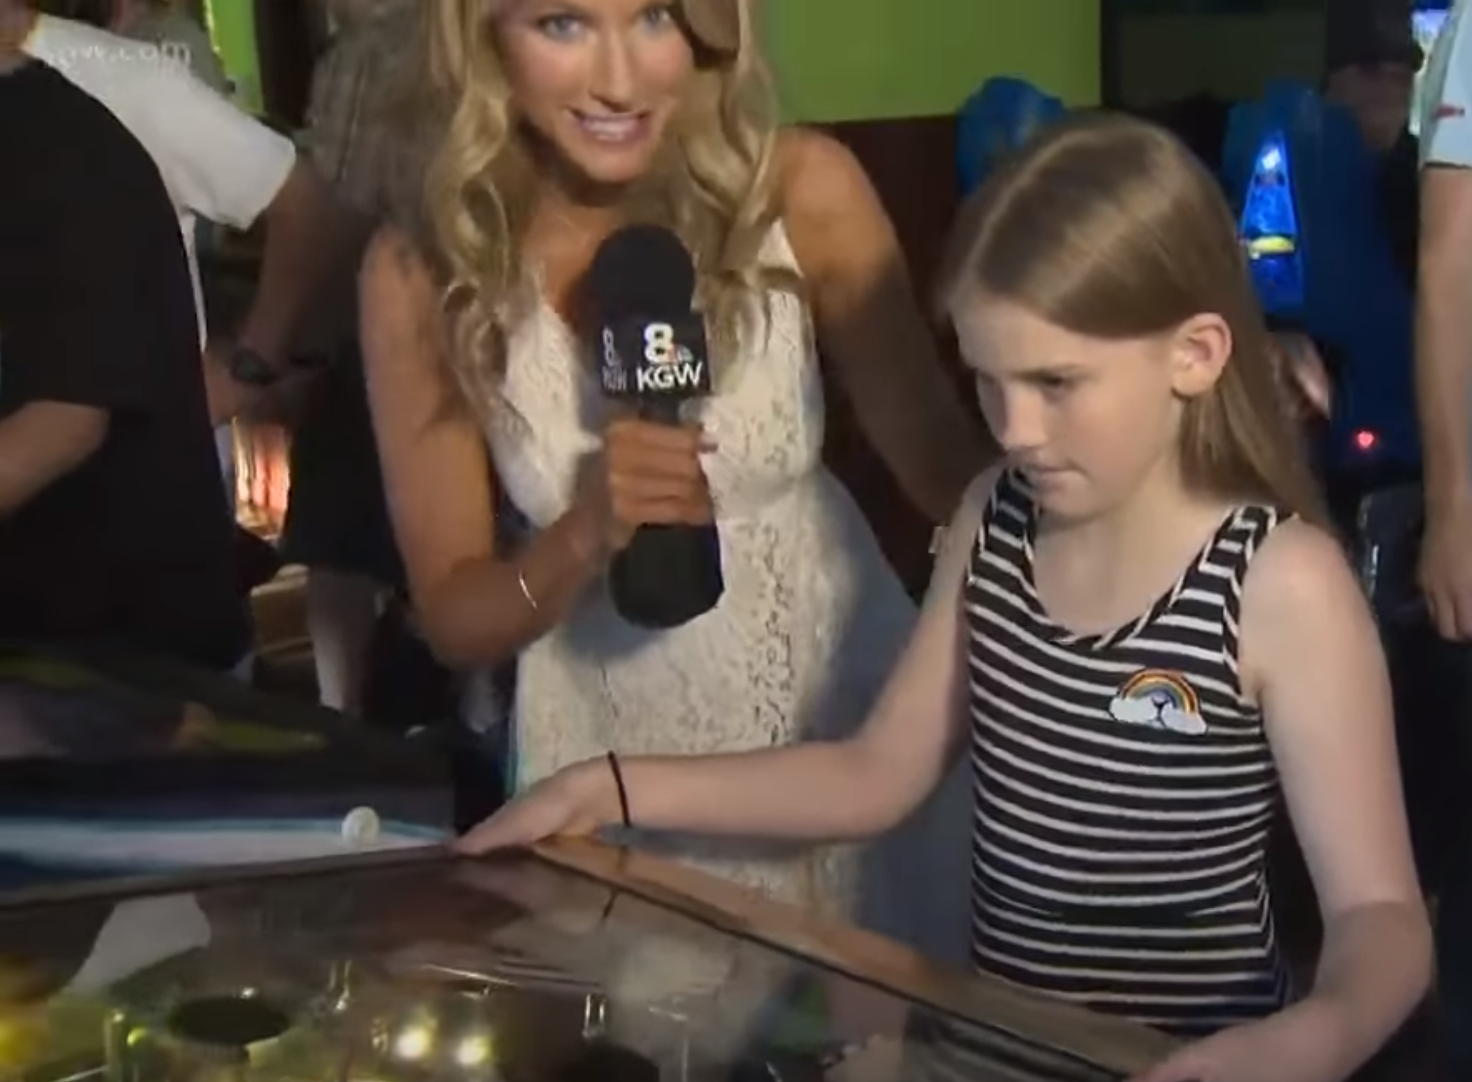 This just in … Intrepid reporter foolishly interrupts pinball player.